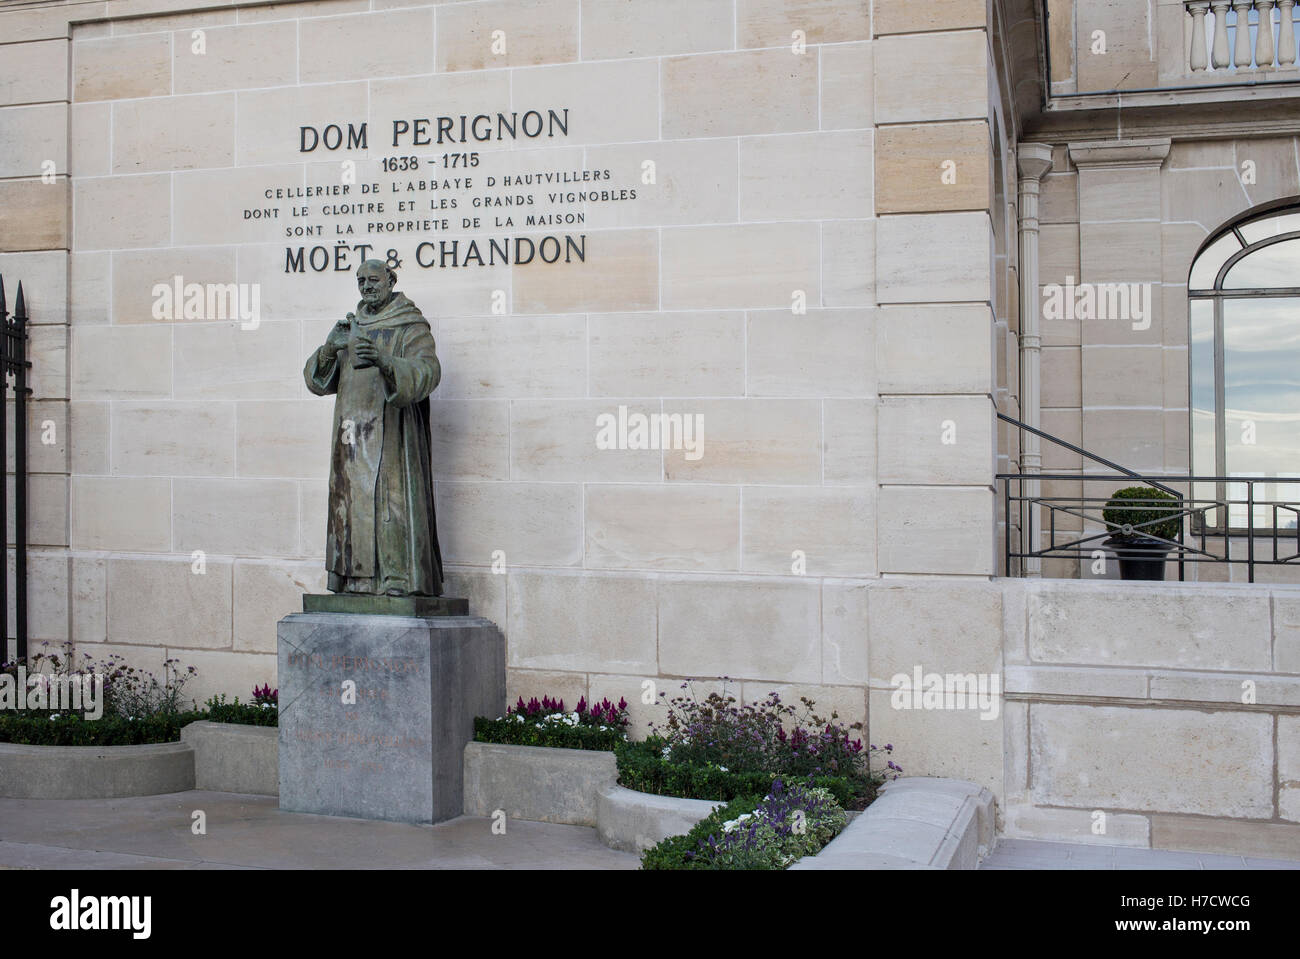 Dom Perignon statue at Moet & Chandon in Epernay, France Stock Photo